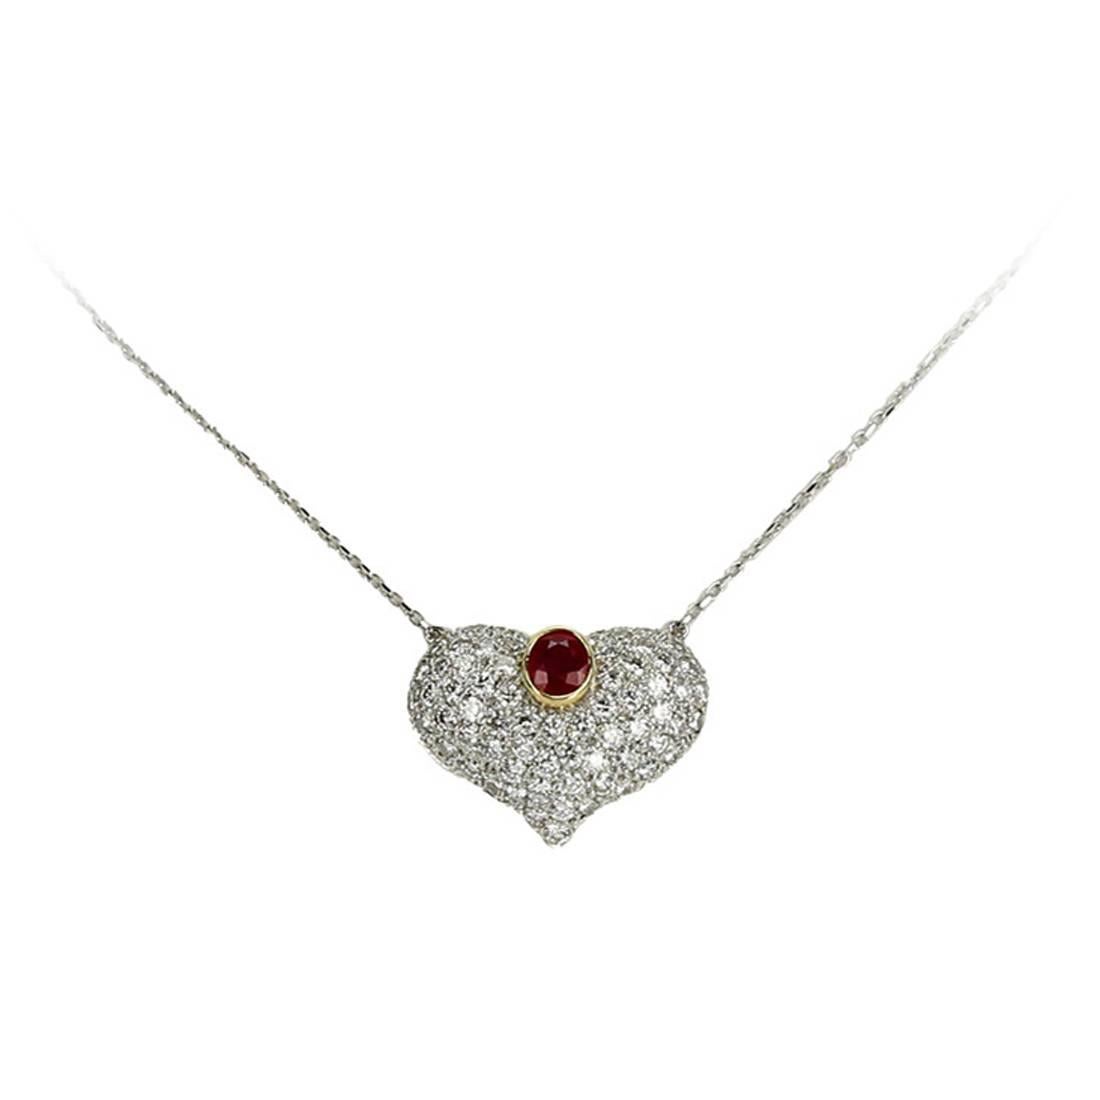 3.25 Carat Ruby Heart and Diamond Gold Vintage Necklace Estate Fine Jewelry